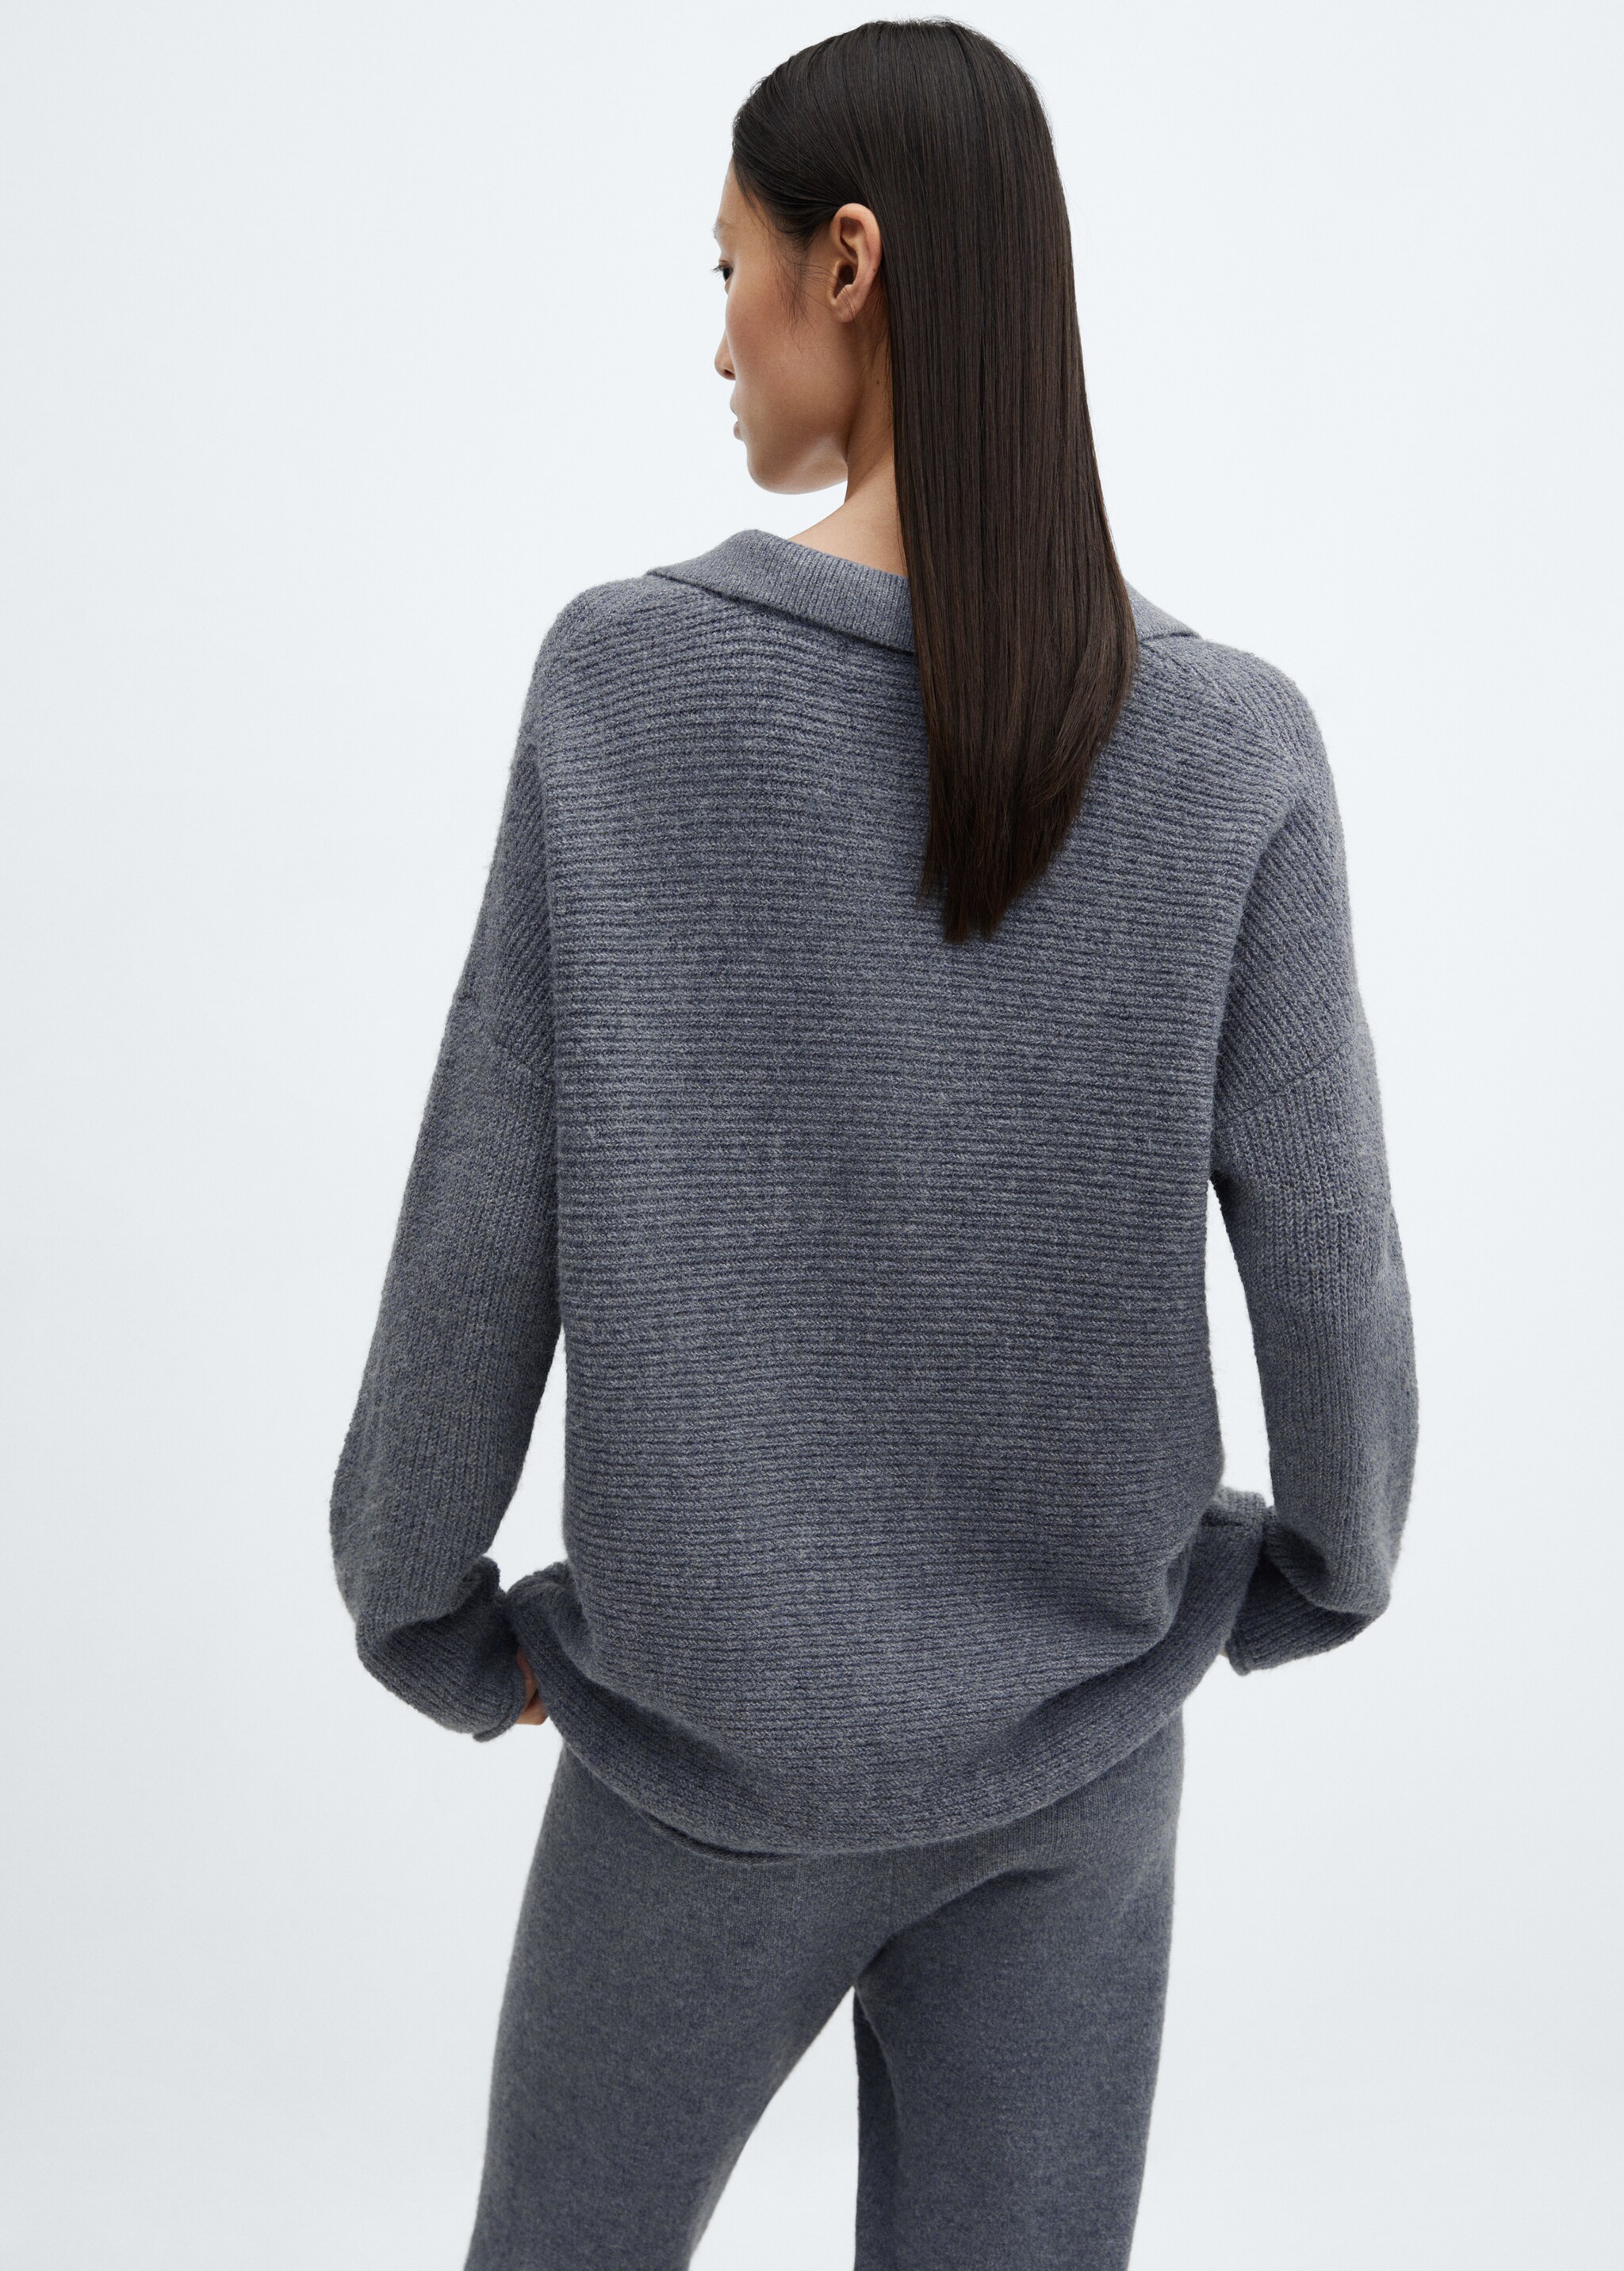 Oversized knit sweater - Reverse of the article